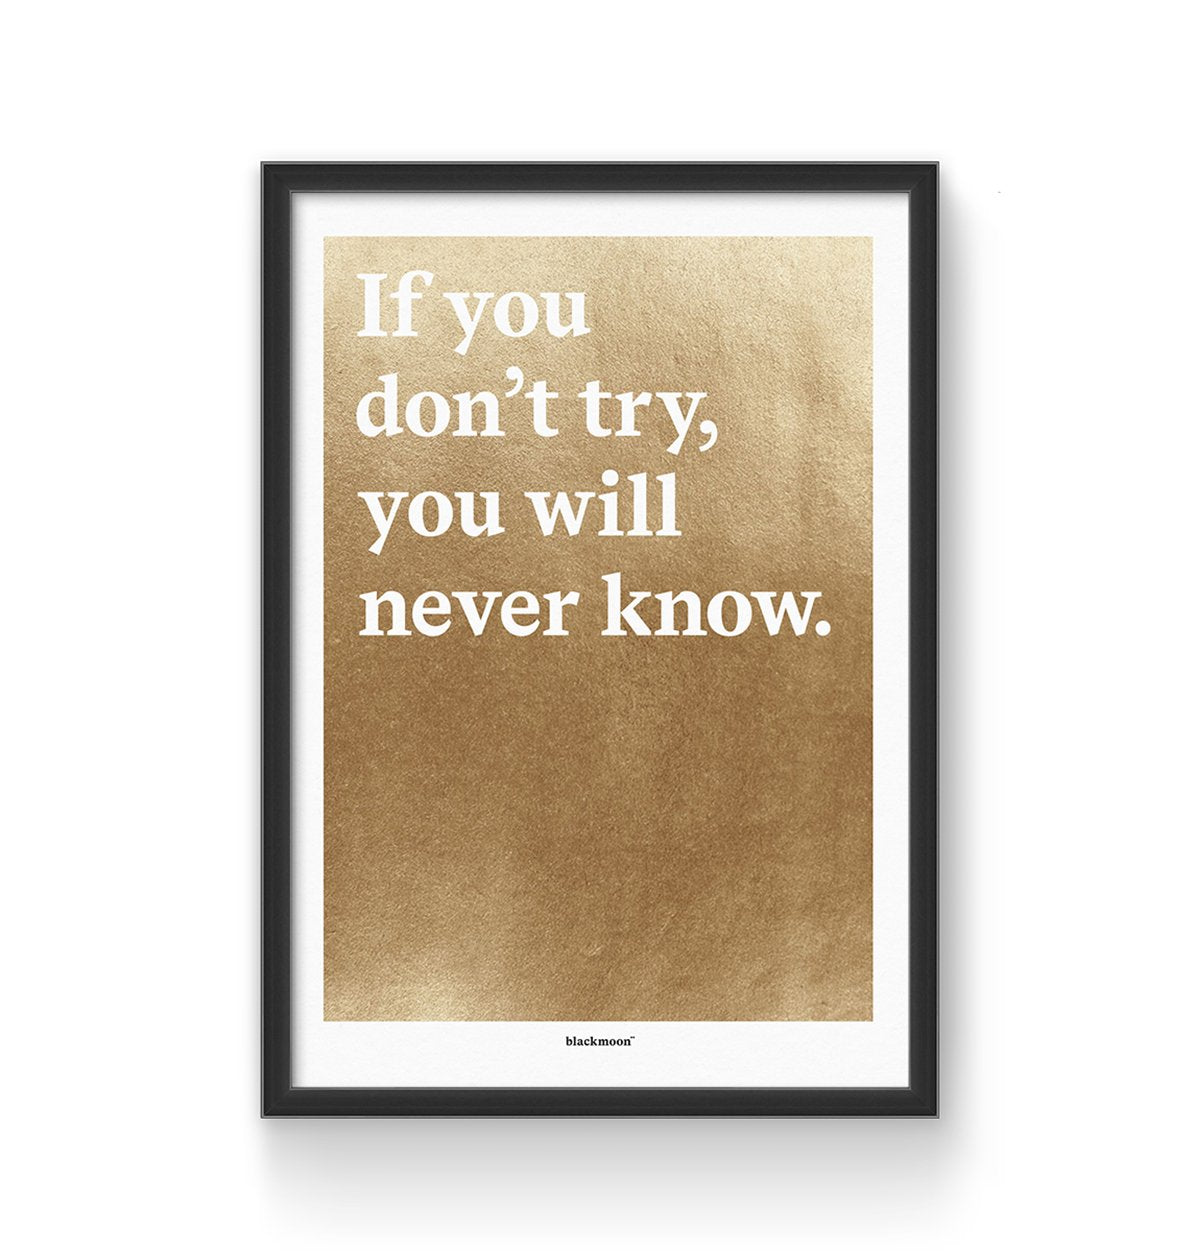 Art Print "If you don't try"